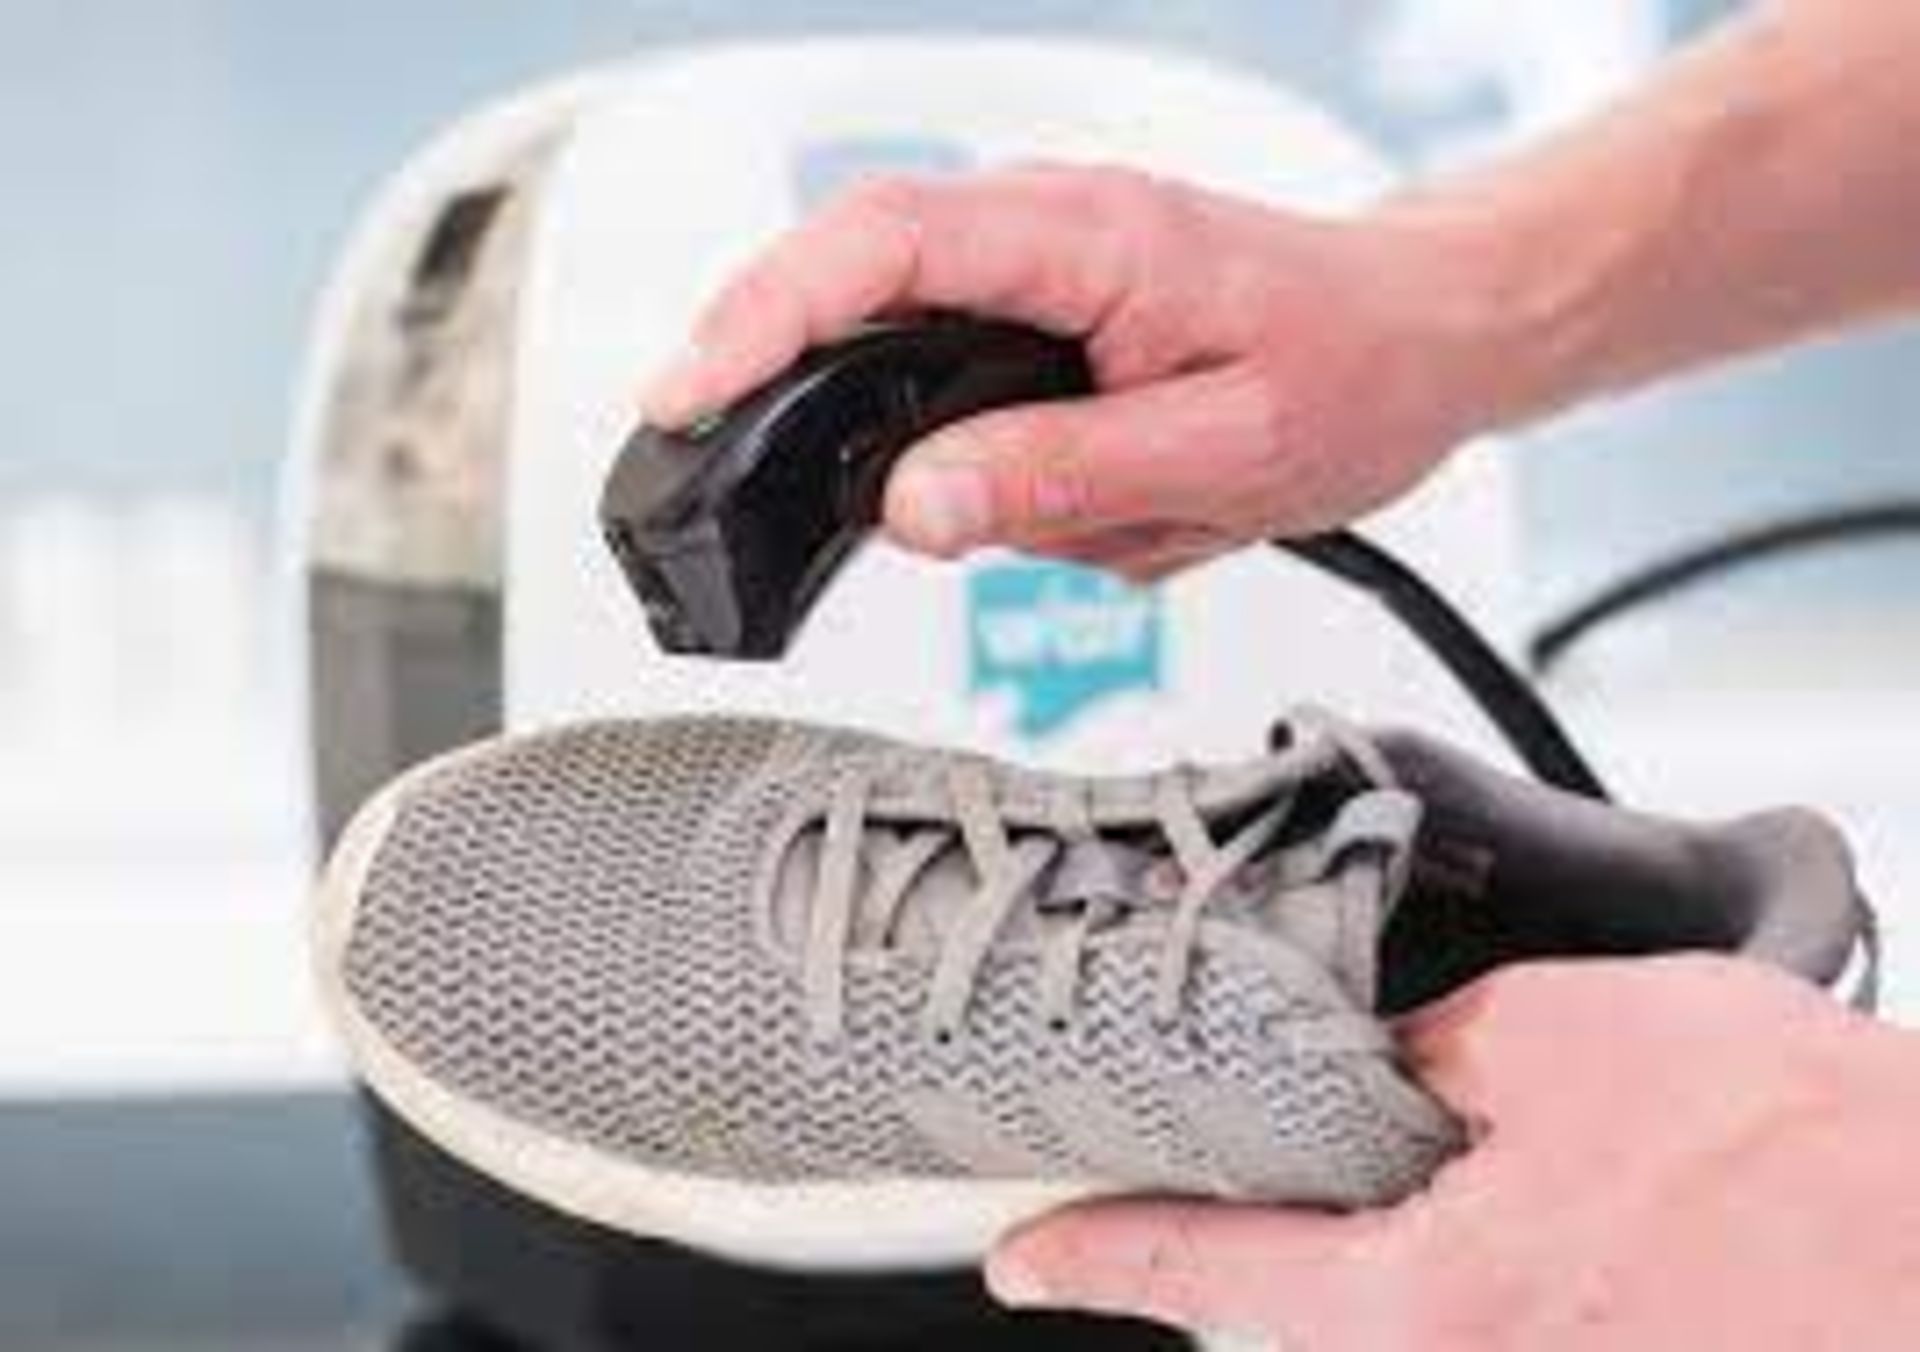 5 X BRAND NEW W'AIR SNEAKER CLEANING SYSTEMS RRP £299, The w'air uses hydrodynamic technology